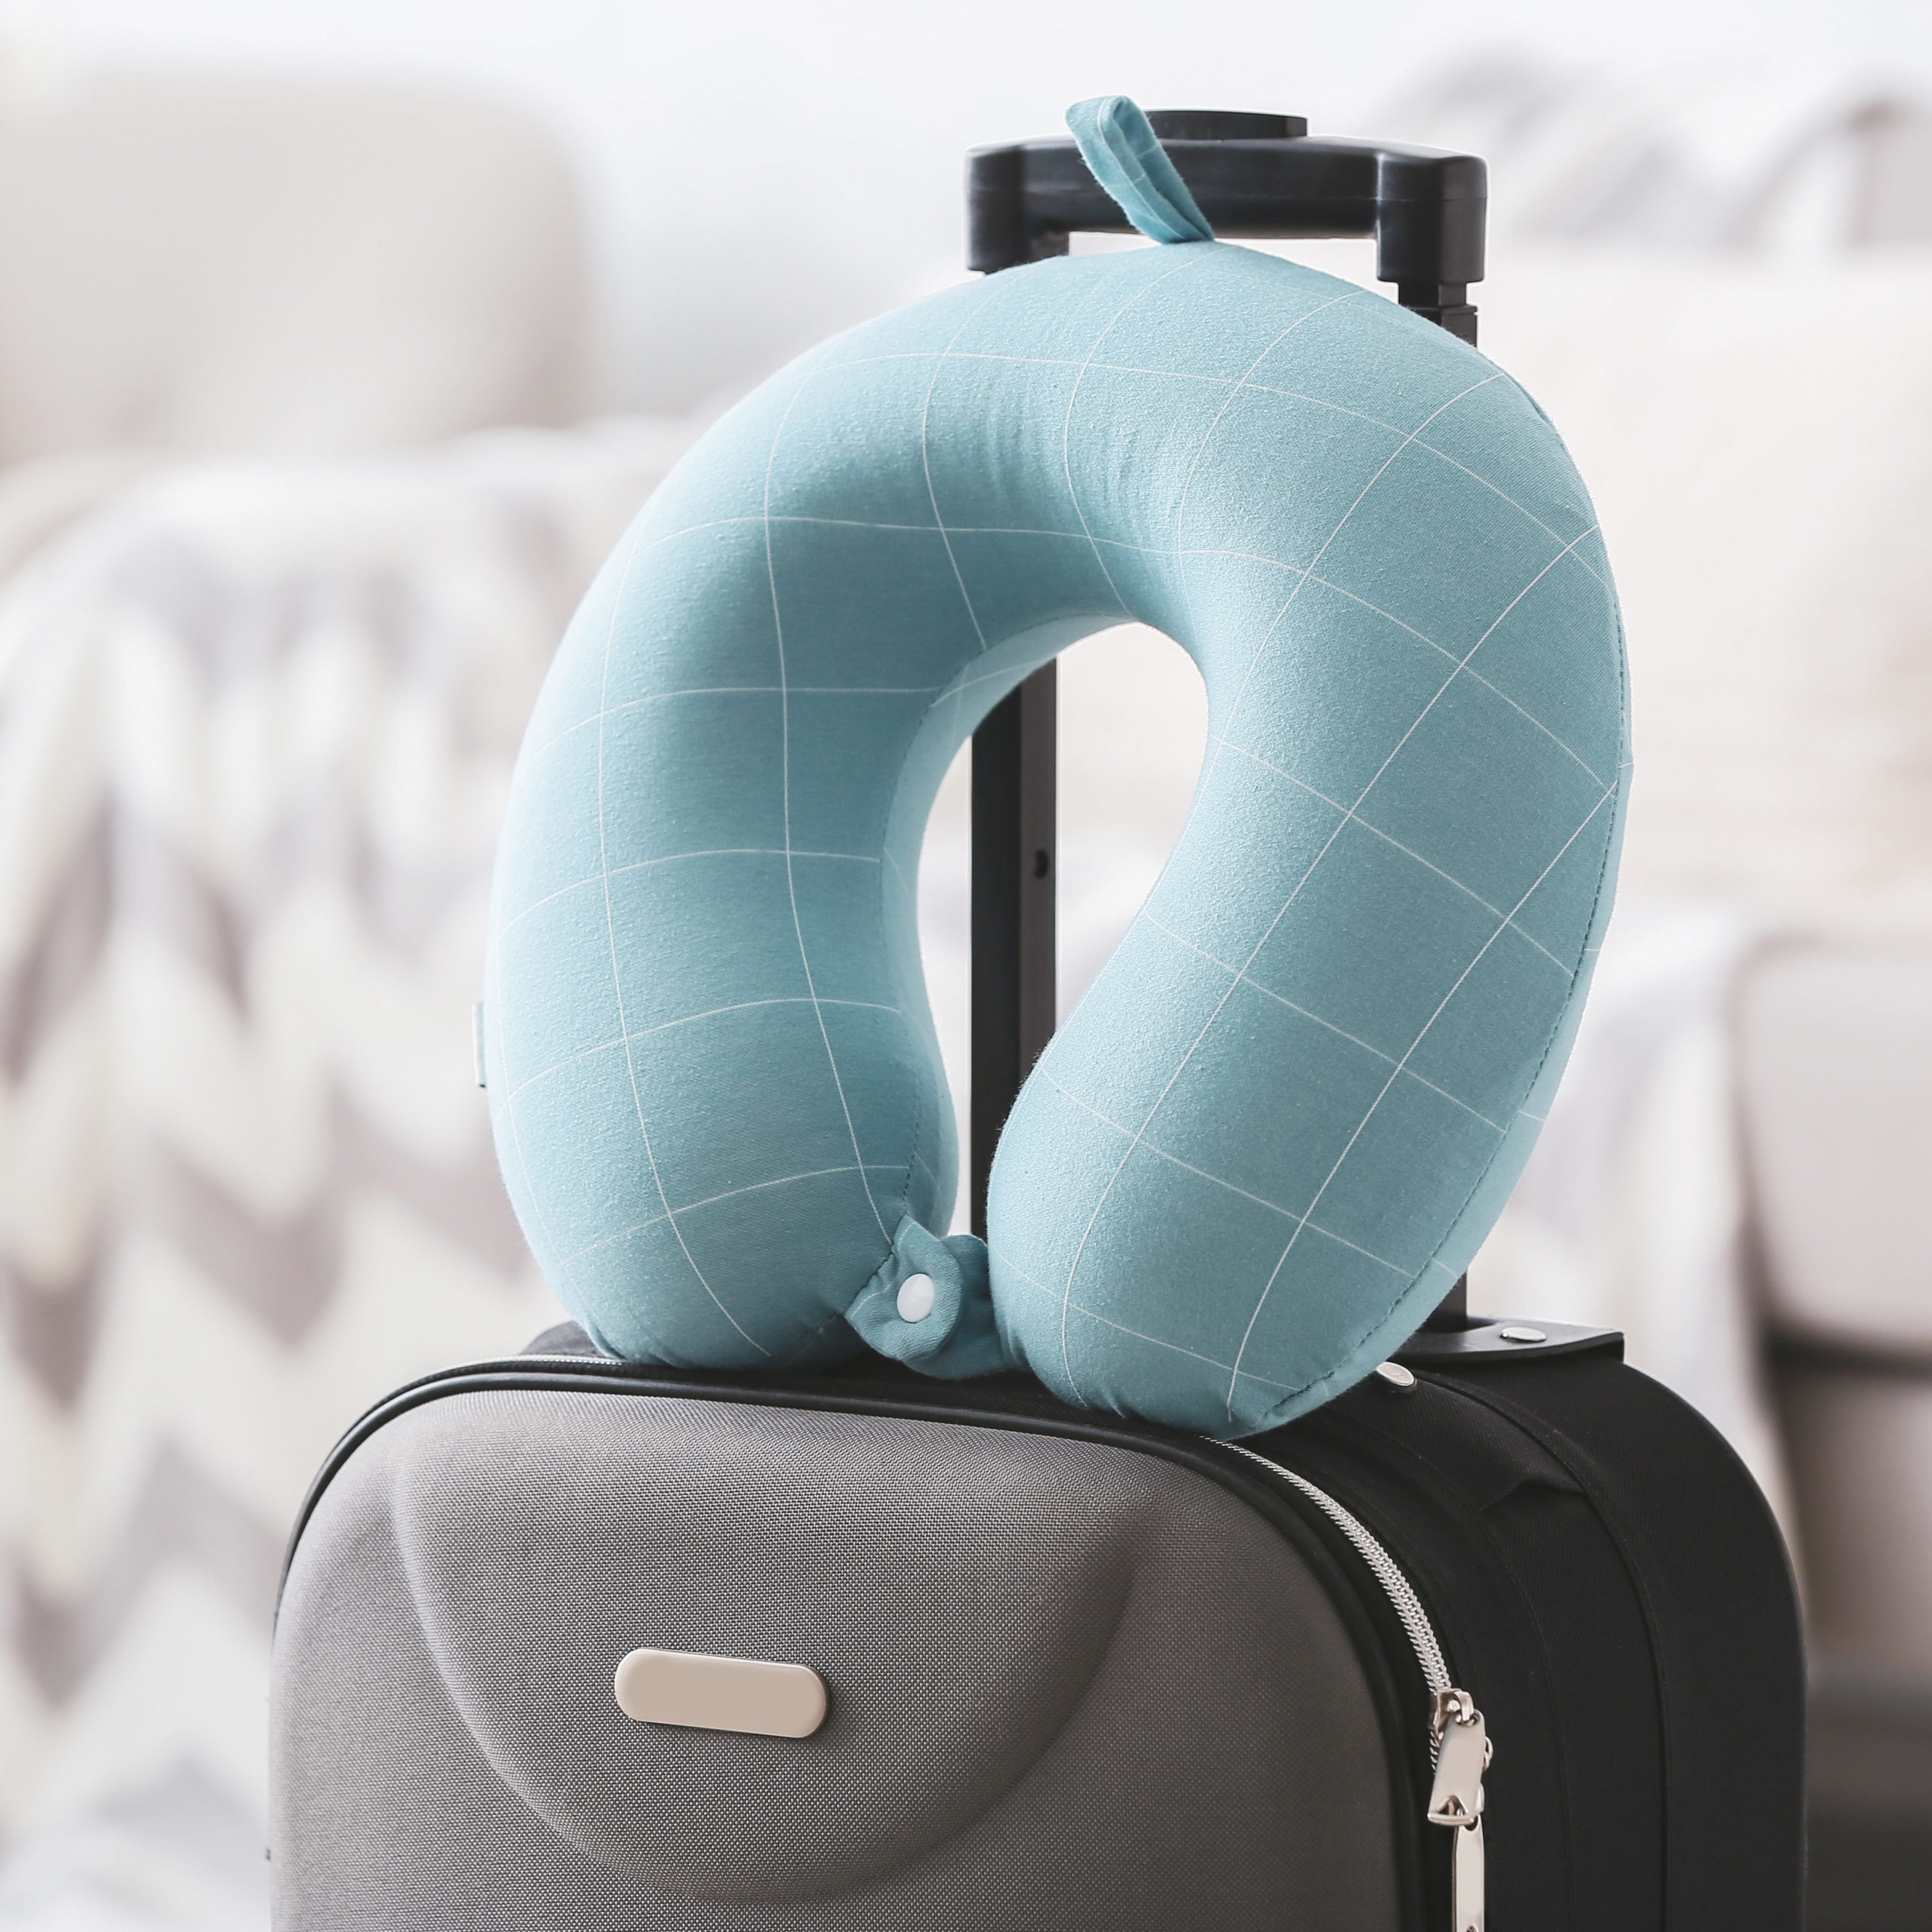 Blue classic neck pillow on top of grey suitcase